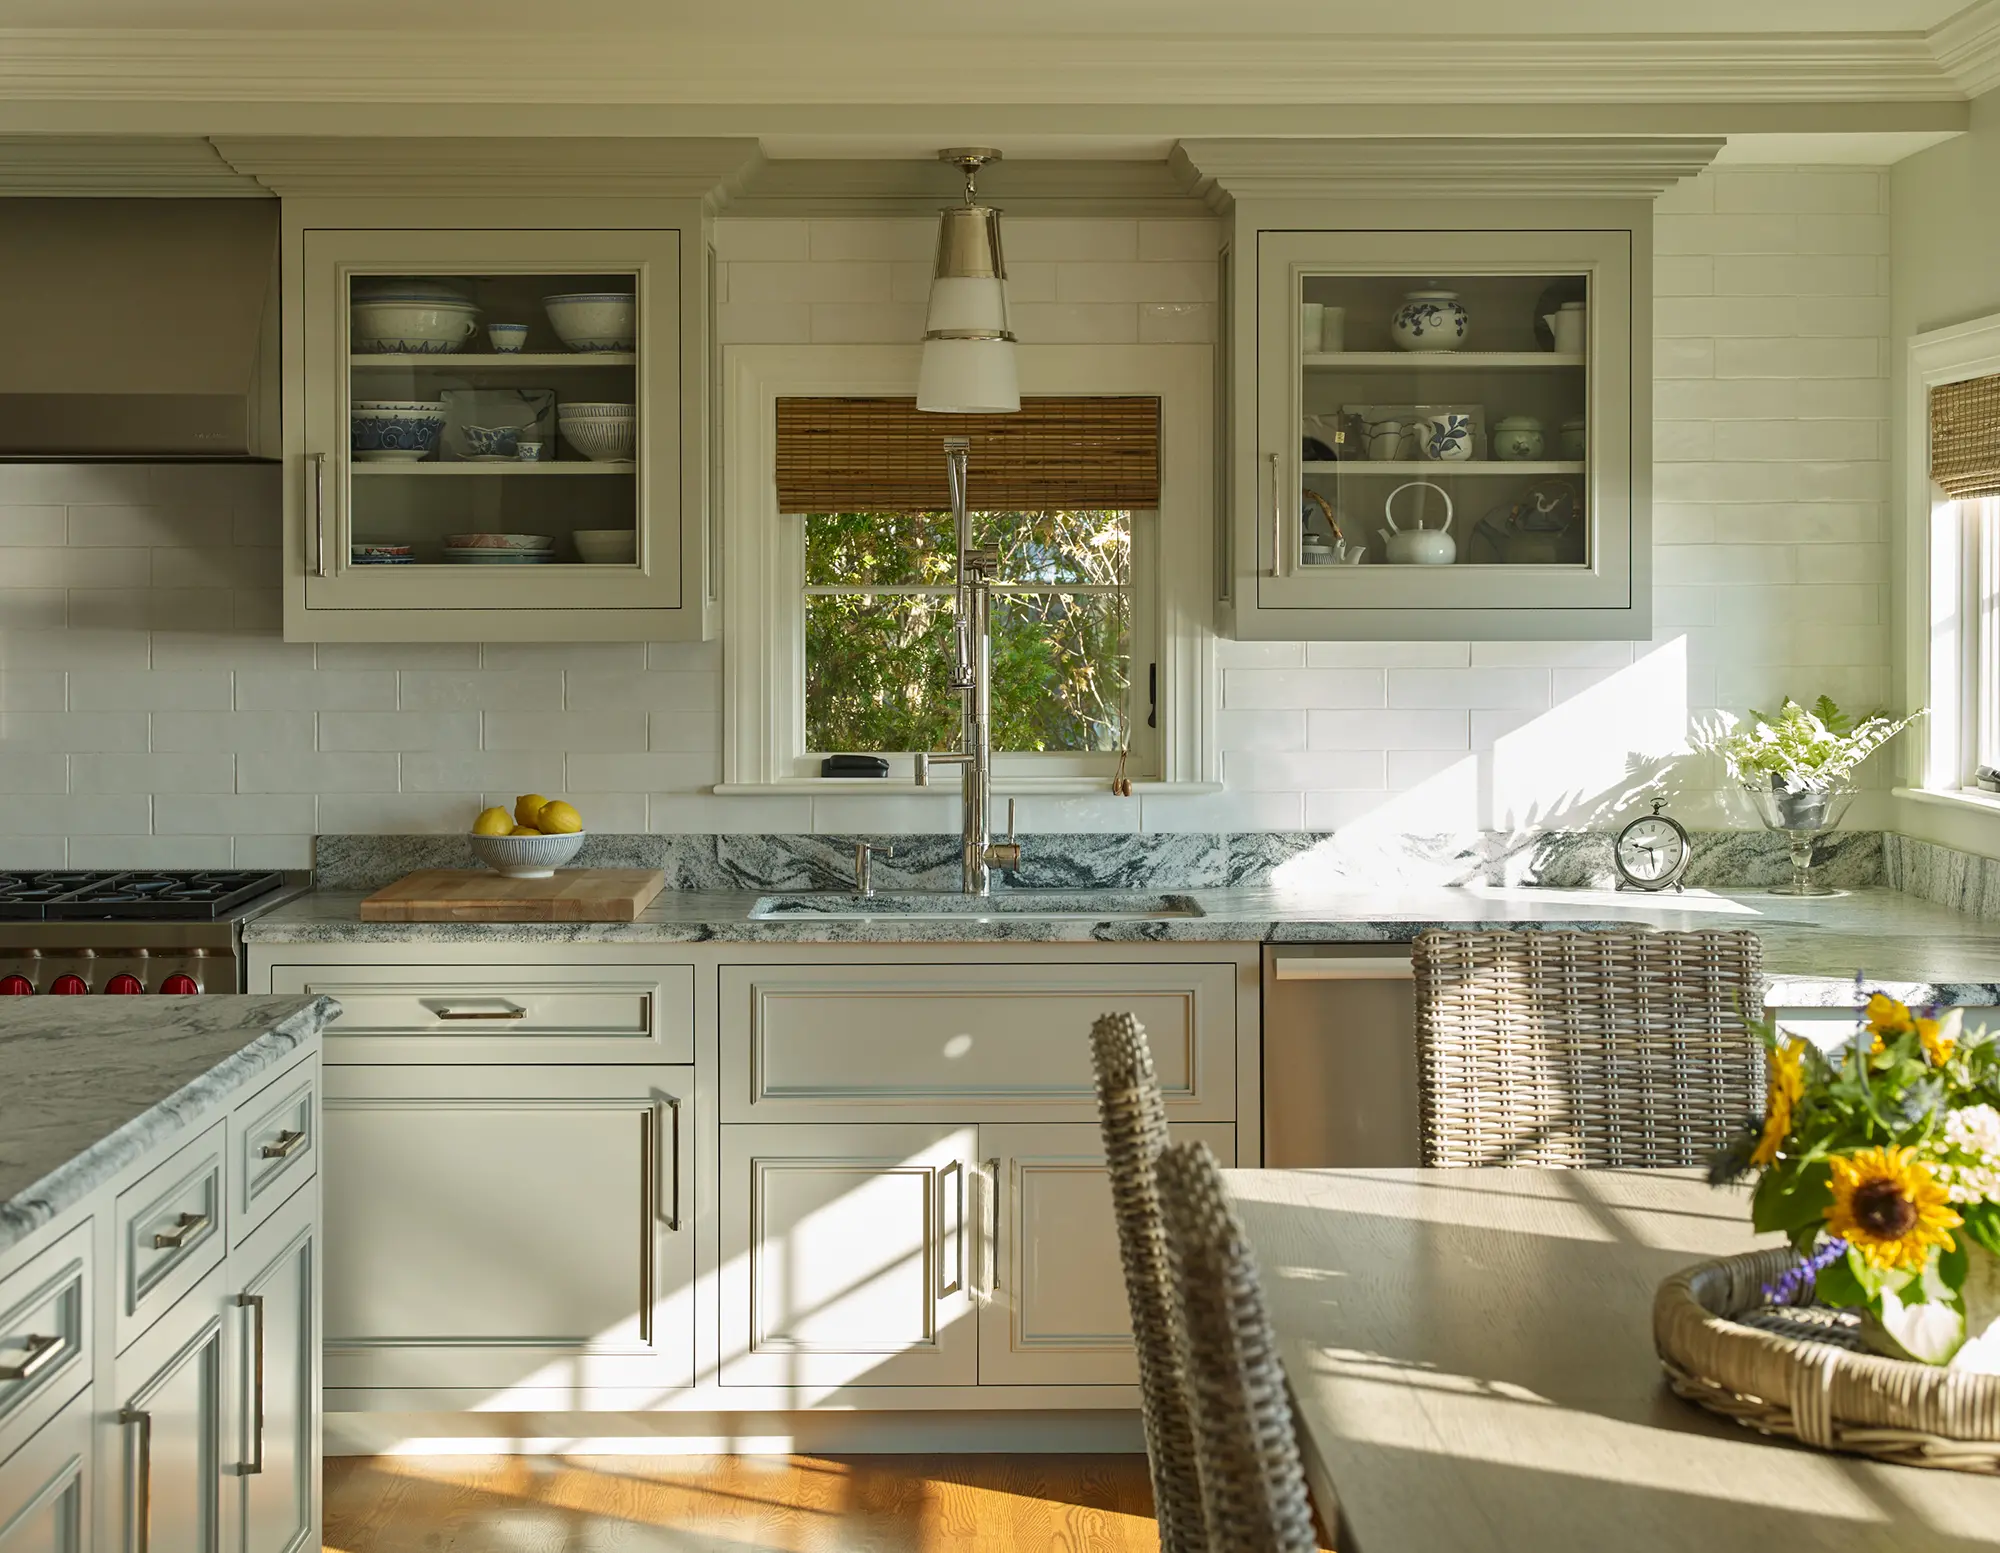 Cabinets with glass doors, marbled countertops, a large faucet and detailed molding.